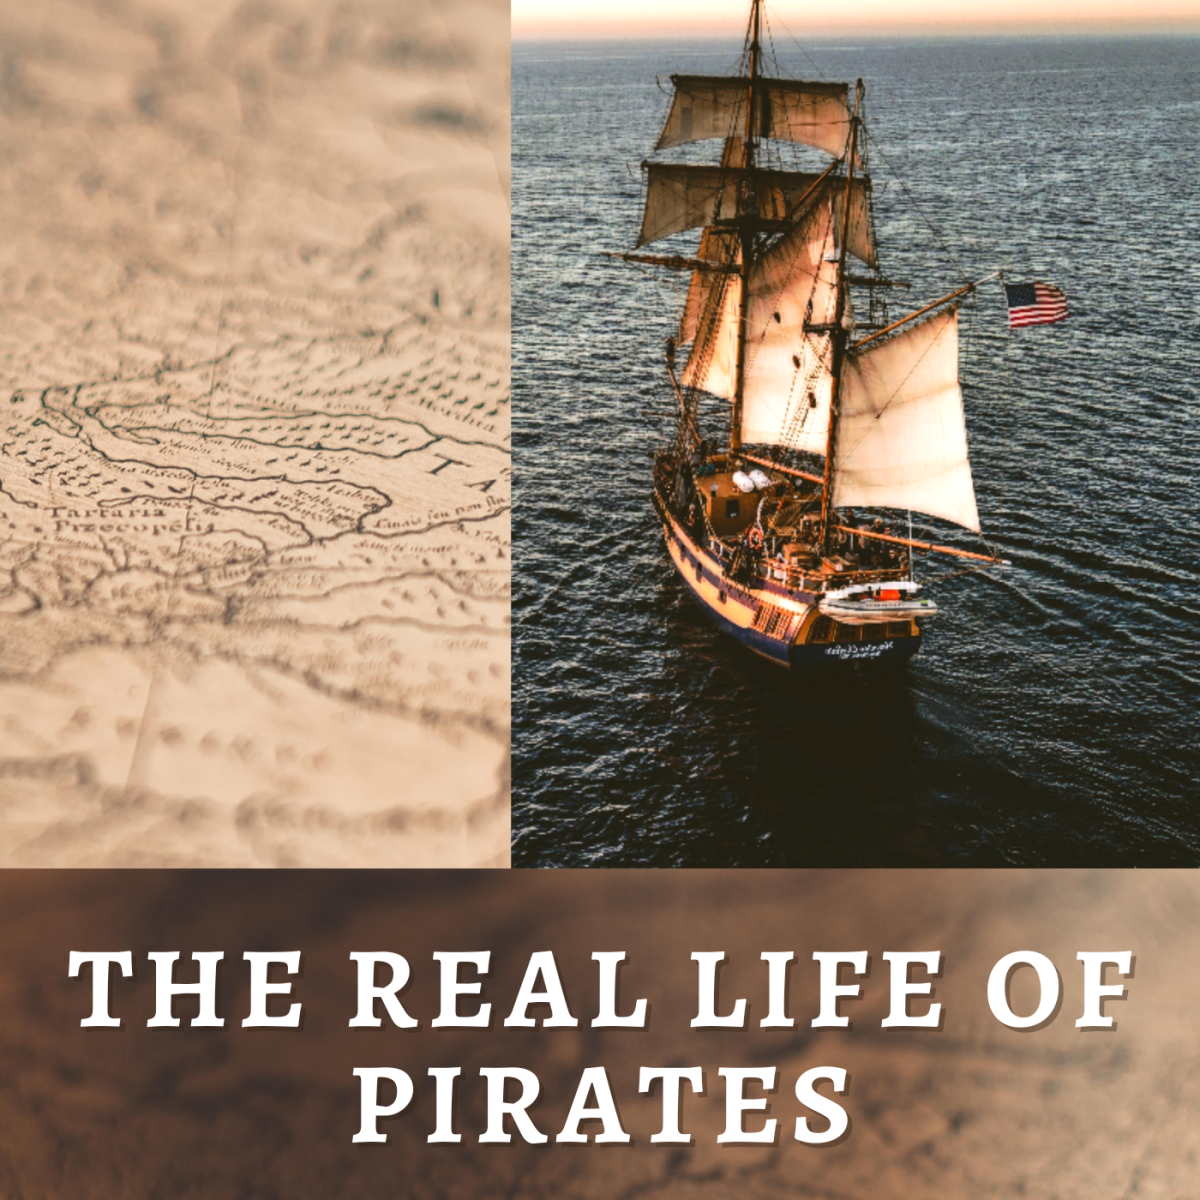 The Life of a Pirate: What They Ate, What They Did for Fun, and More!